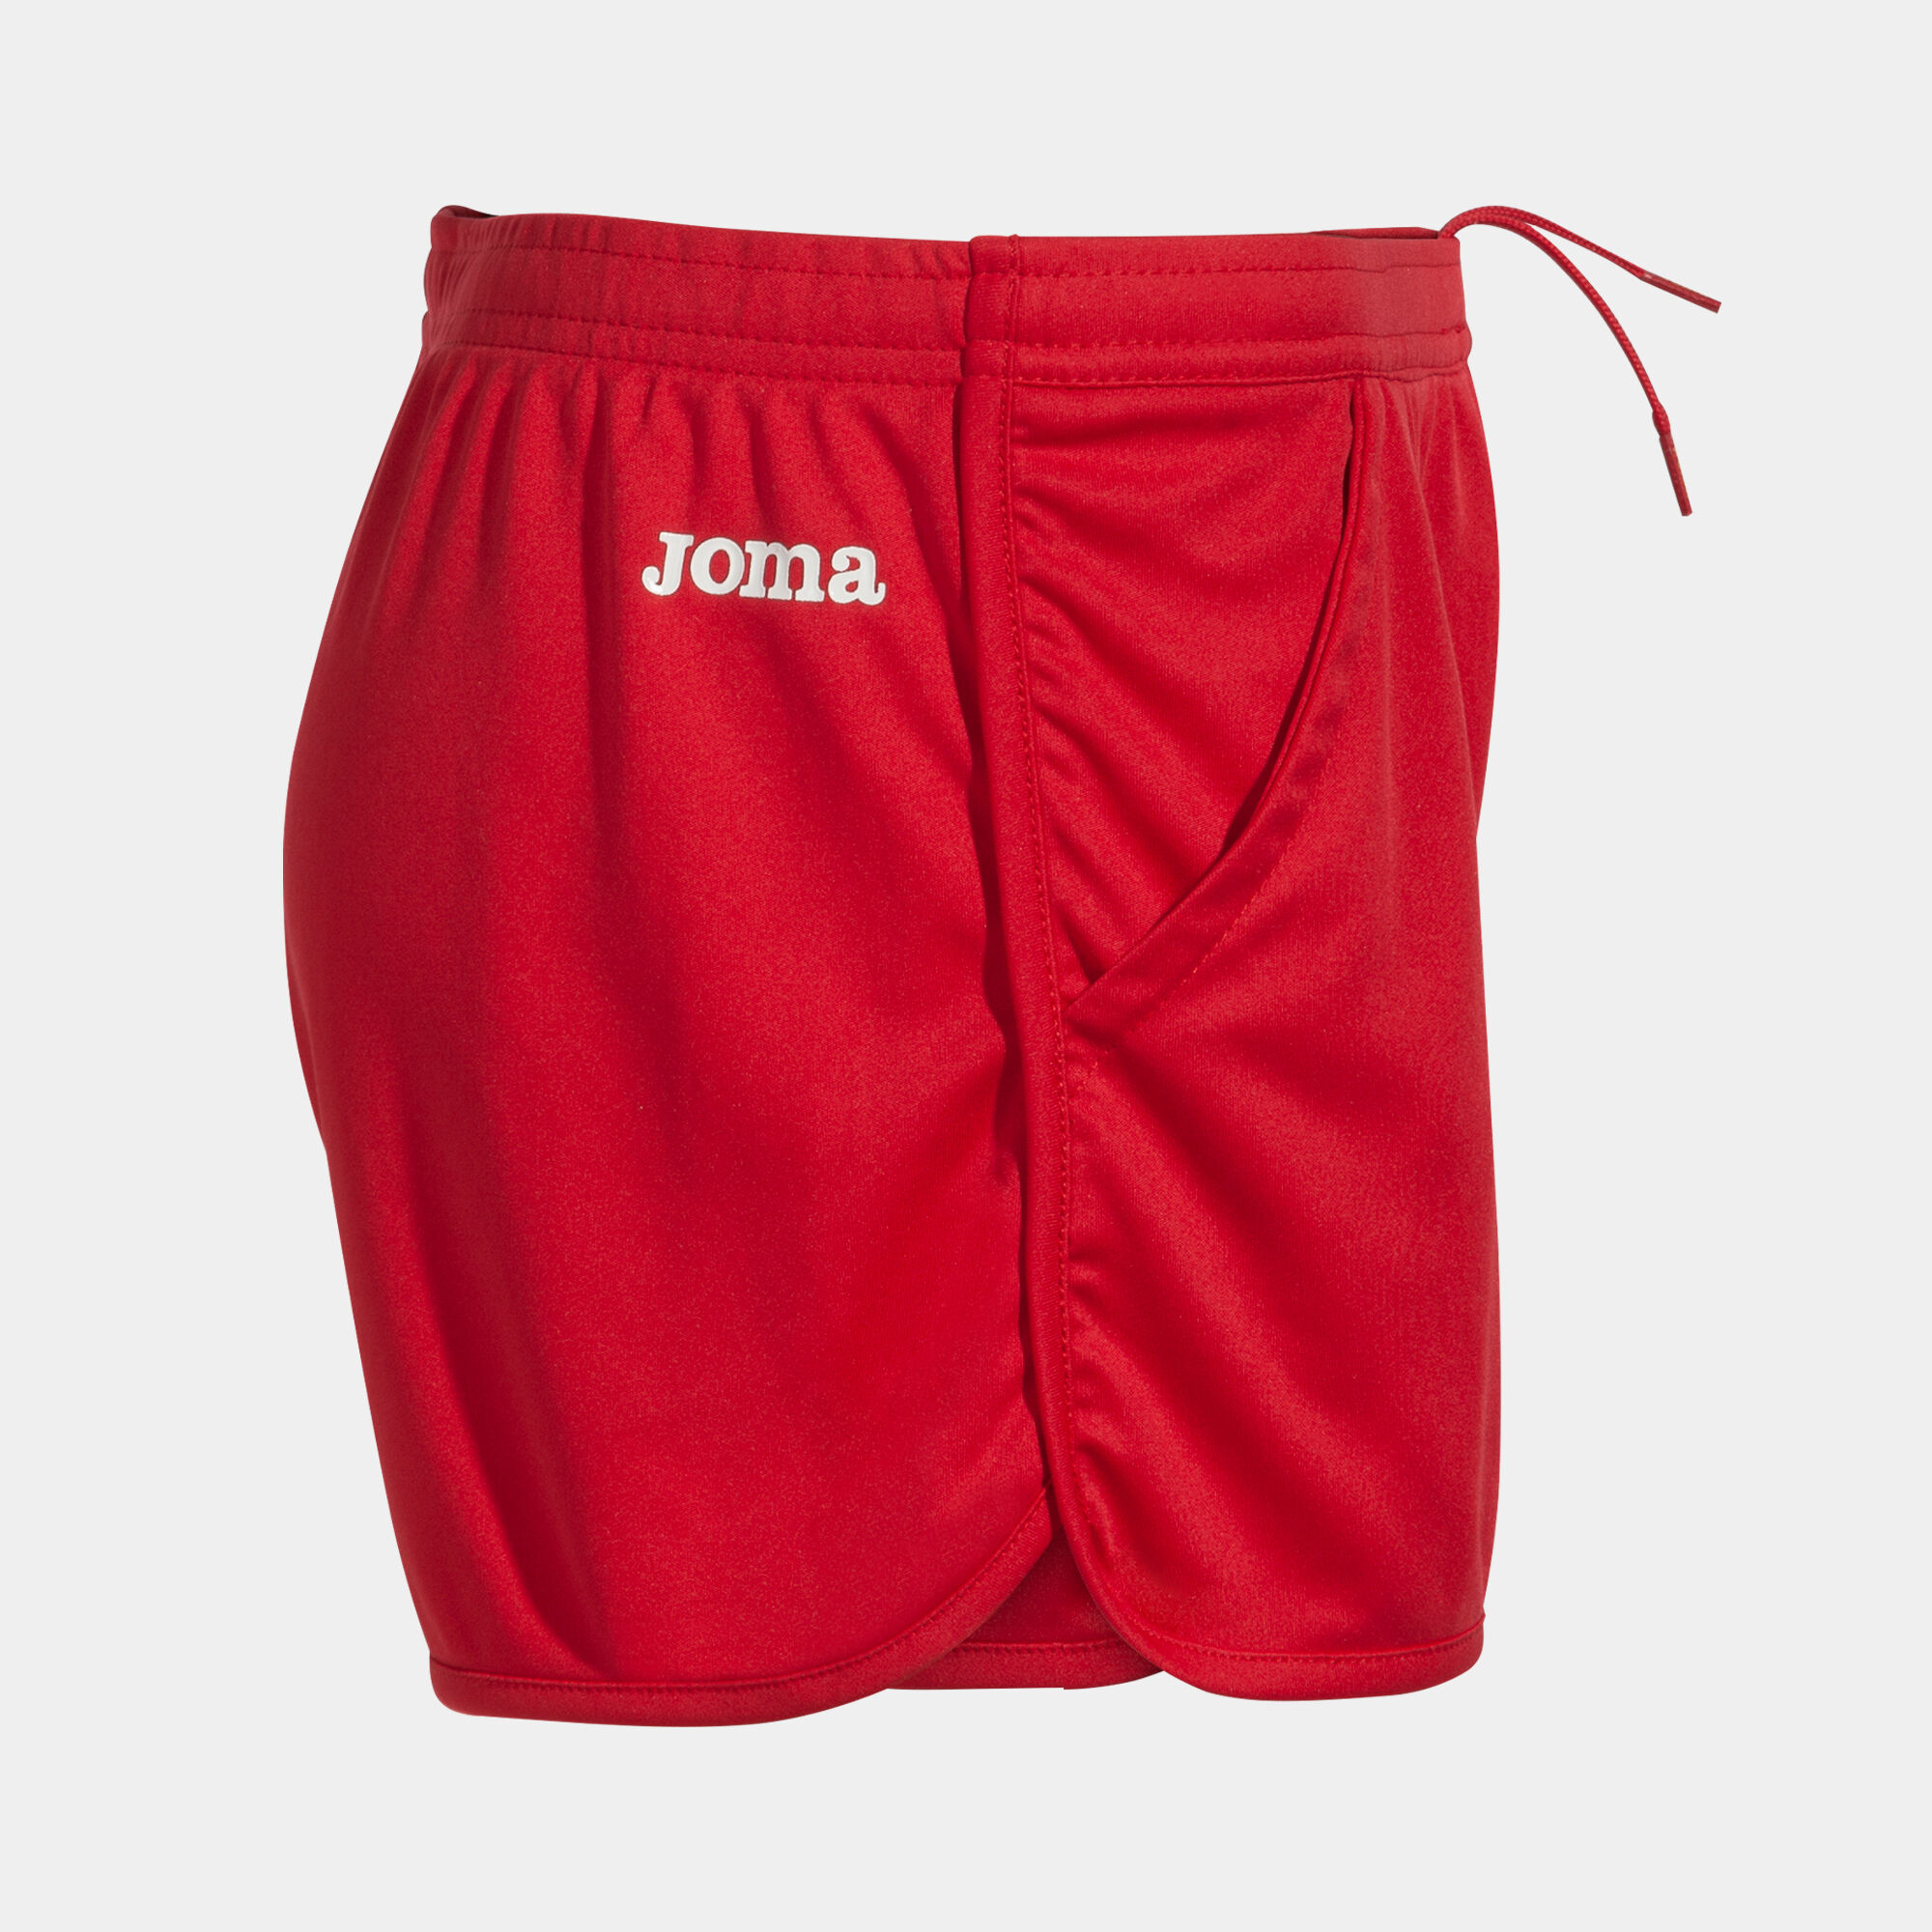 Shorts woman Hobby red